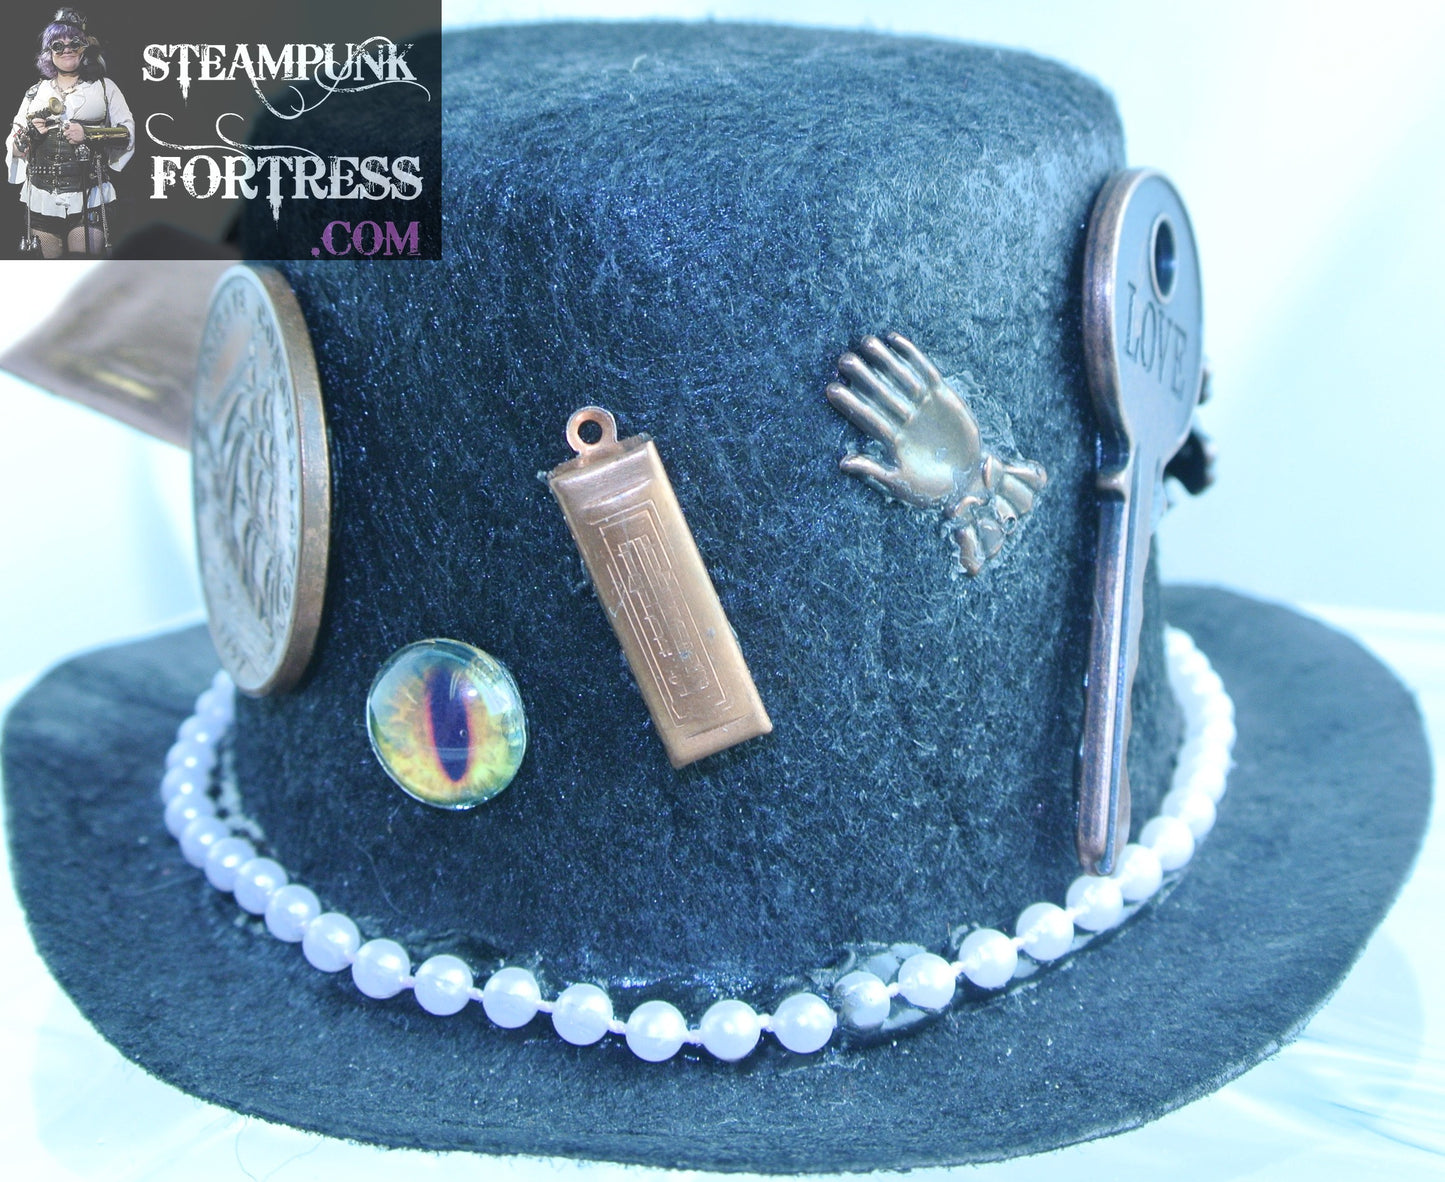 BLACK FAN BROWN REMOVABLE PIN BROOCH COPPER BELL COIN YELLOW CATS EYE HARMONICA HAND LOVE KEY KEYHOLE PEARL BAND SMALL MINI TOP HAT STARR WILDE STEAMPUNK FORTRESS